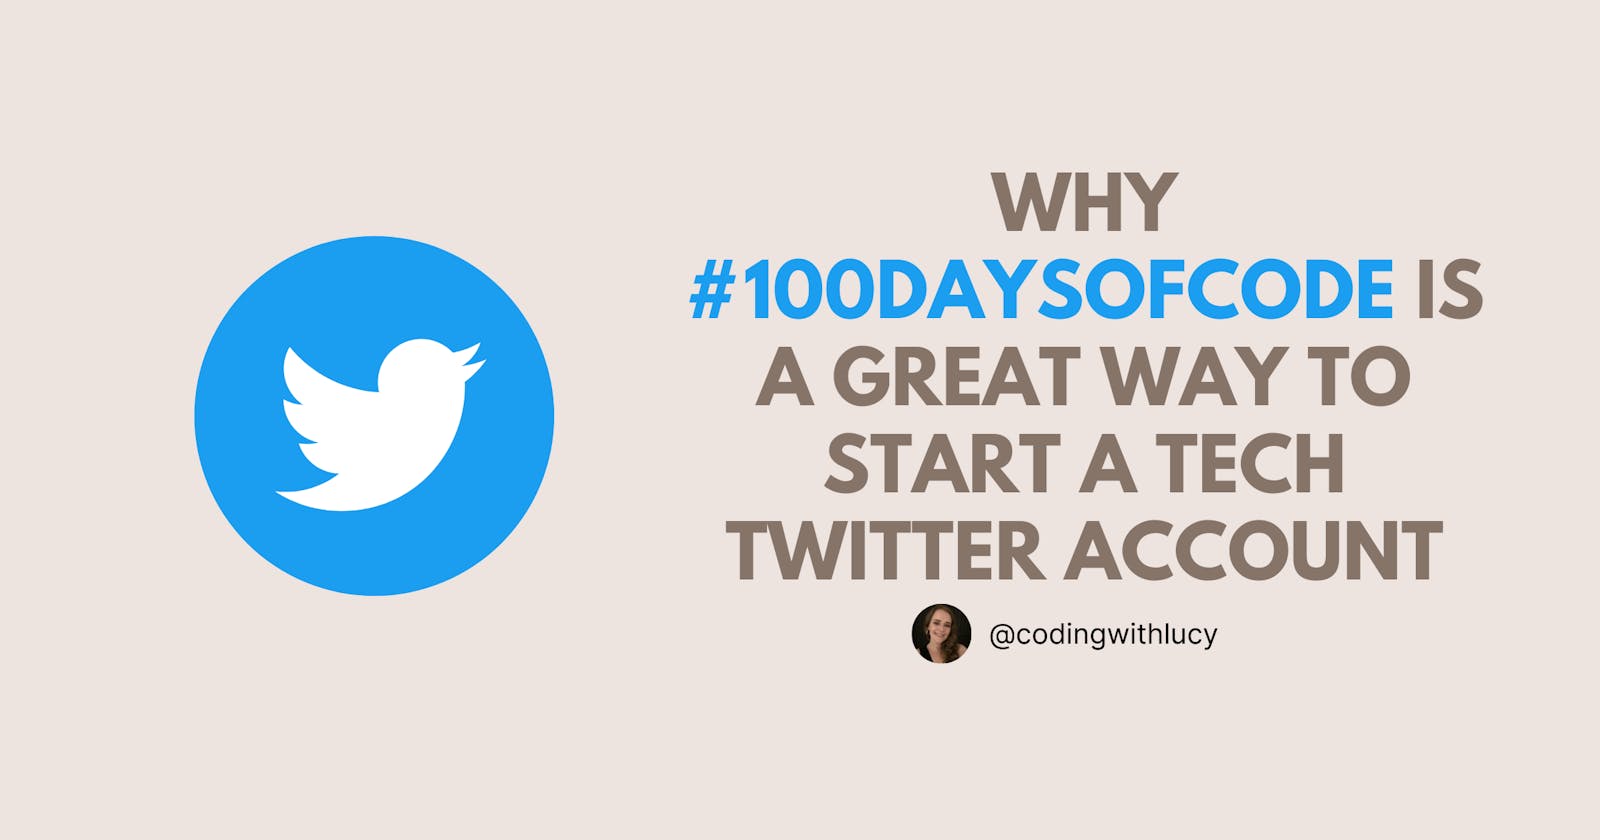 Why #100DaysOfCode is a great way to start a tech Twitter account